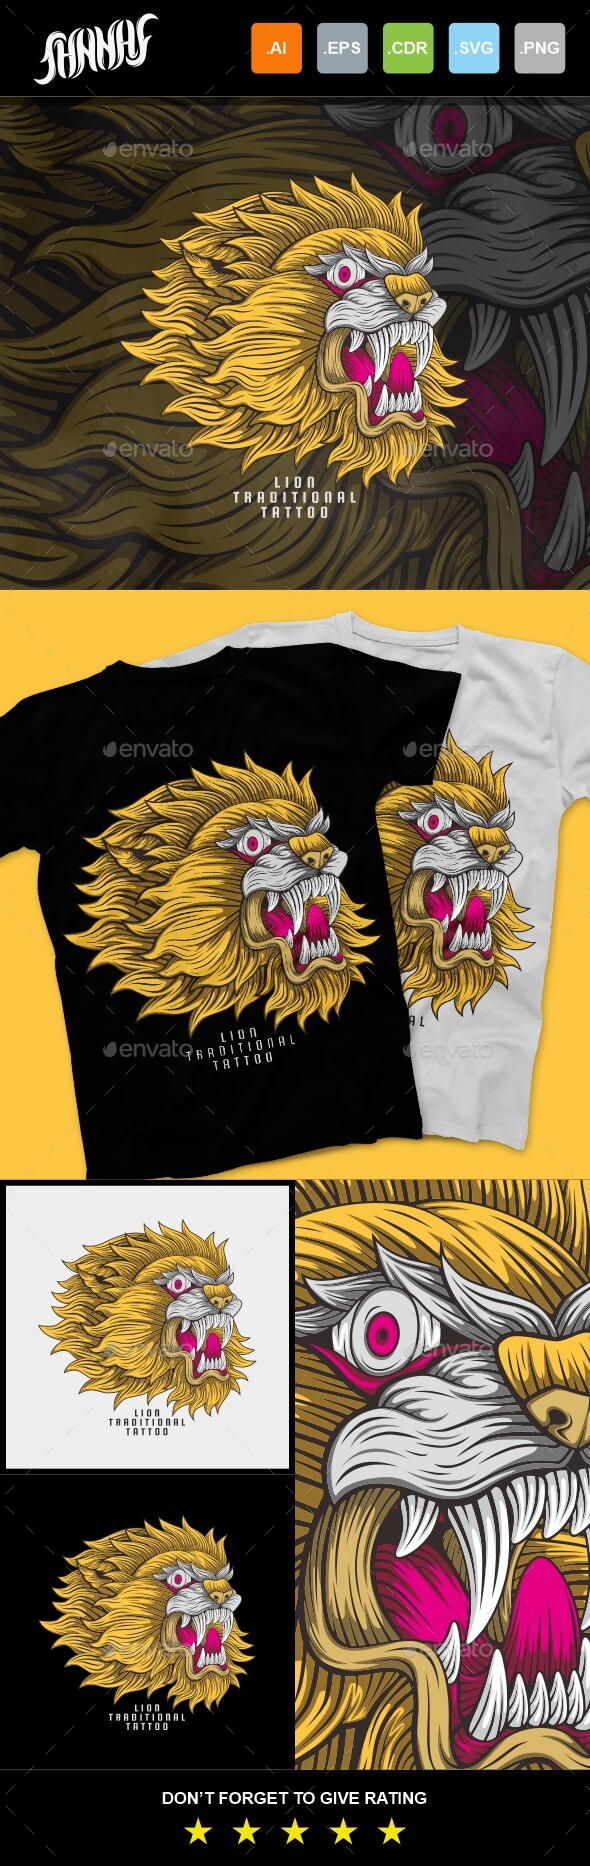 [DOWNLOAD]Lion Traditional Tattoo T-Shirt Design